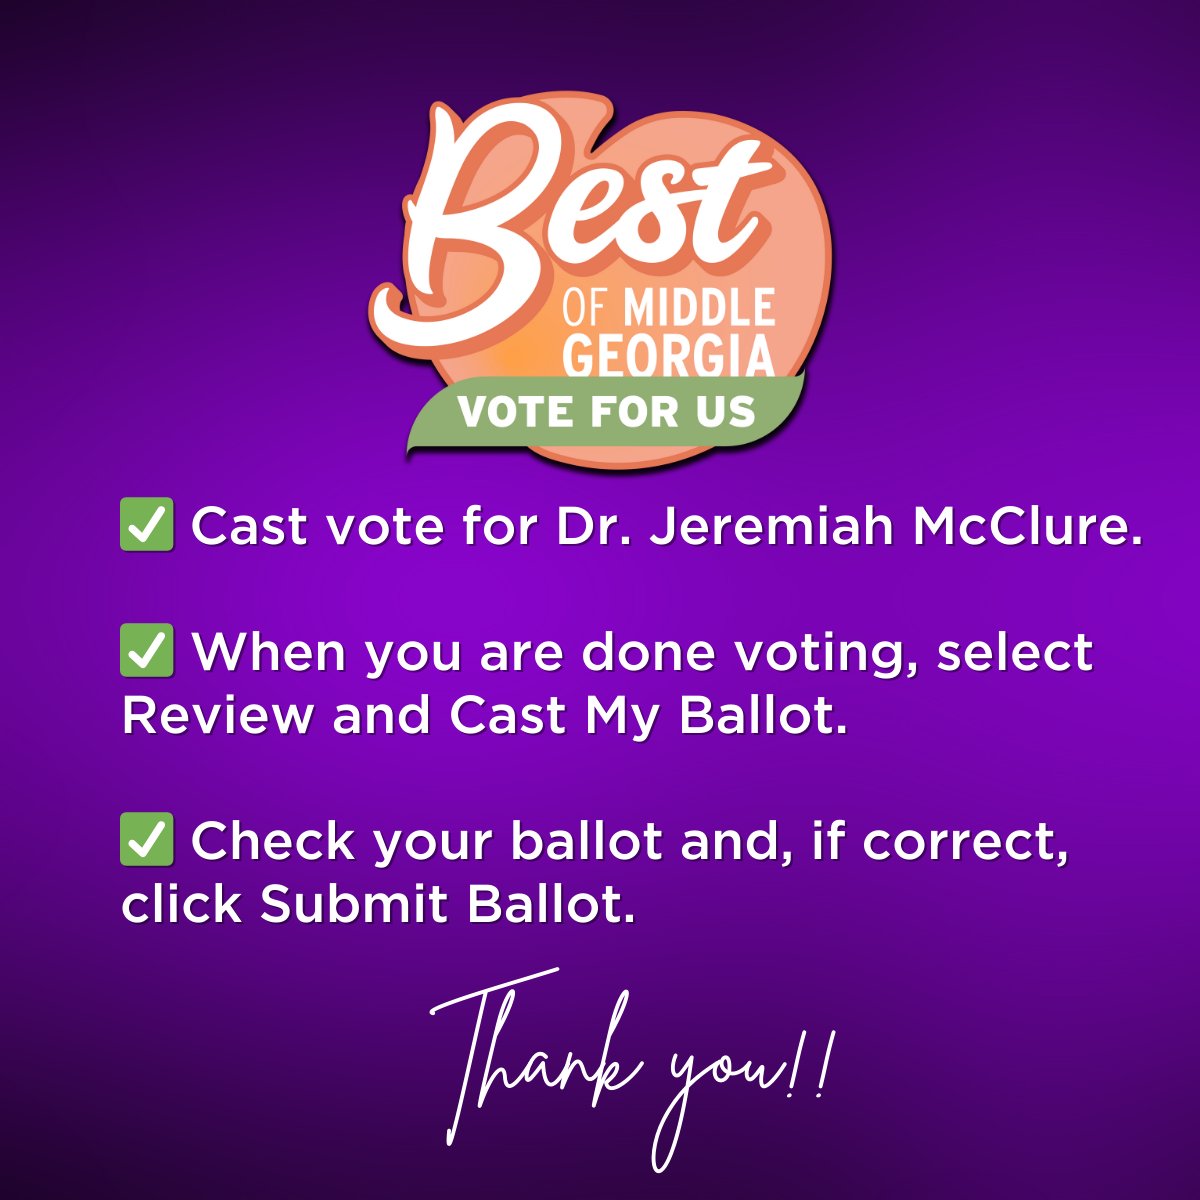 Voting continues for Best of Middle Georgia!

Please visit votemiddlegeorgia.com and and vote for Dr. Jeremiah McClure AND MCC Internal Medicine. A quick 'how-to' slide-show for you today.

Voting runs though May 17th and you can vote once a day!
#BestofMiddleGeorgia